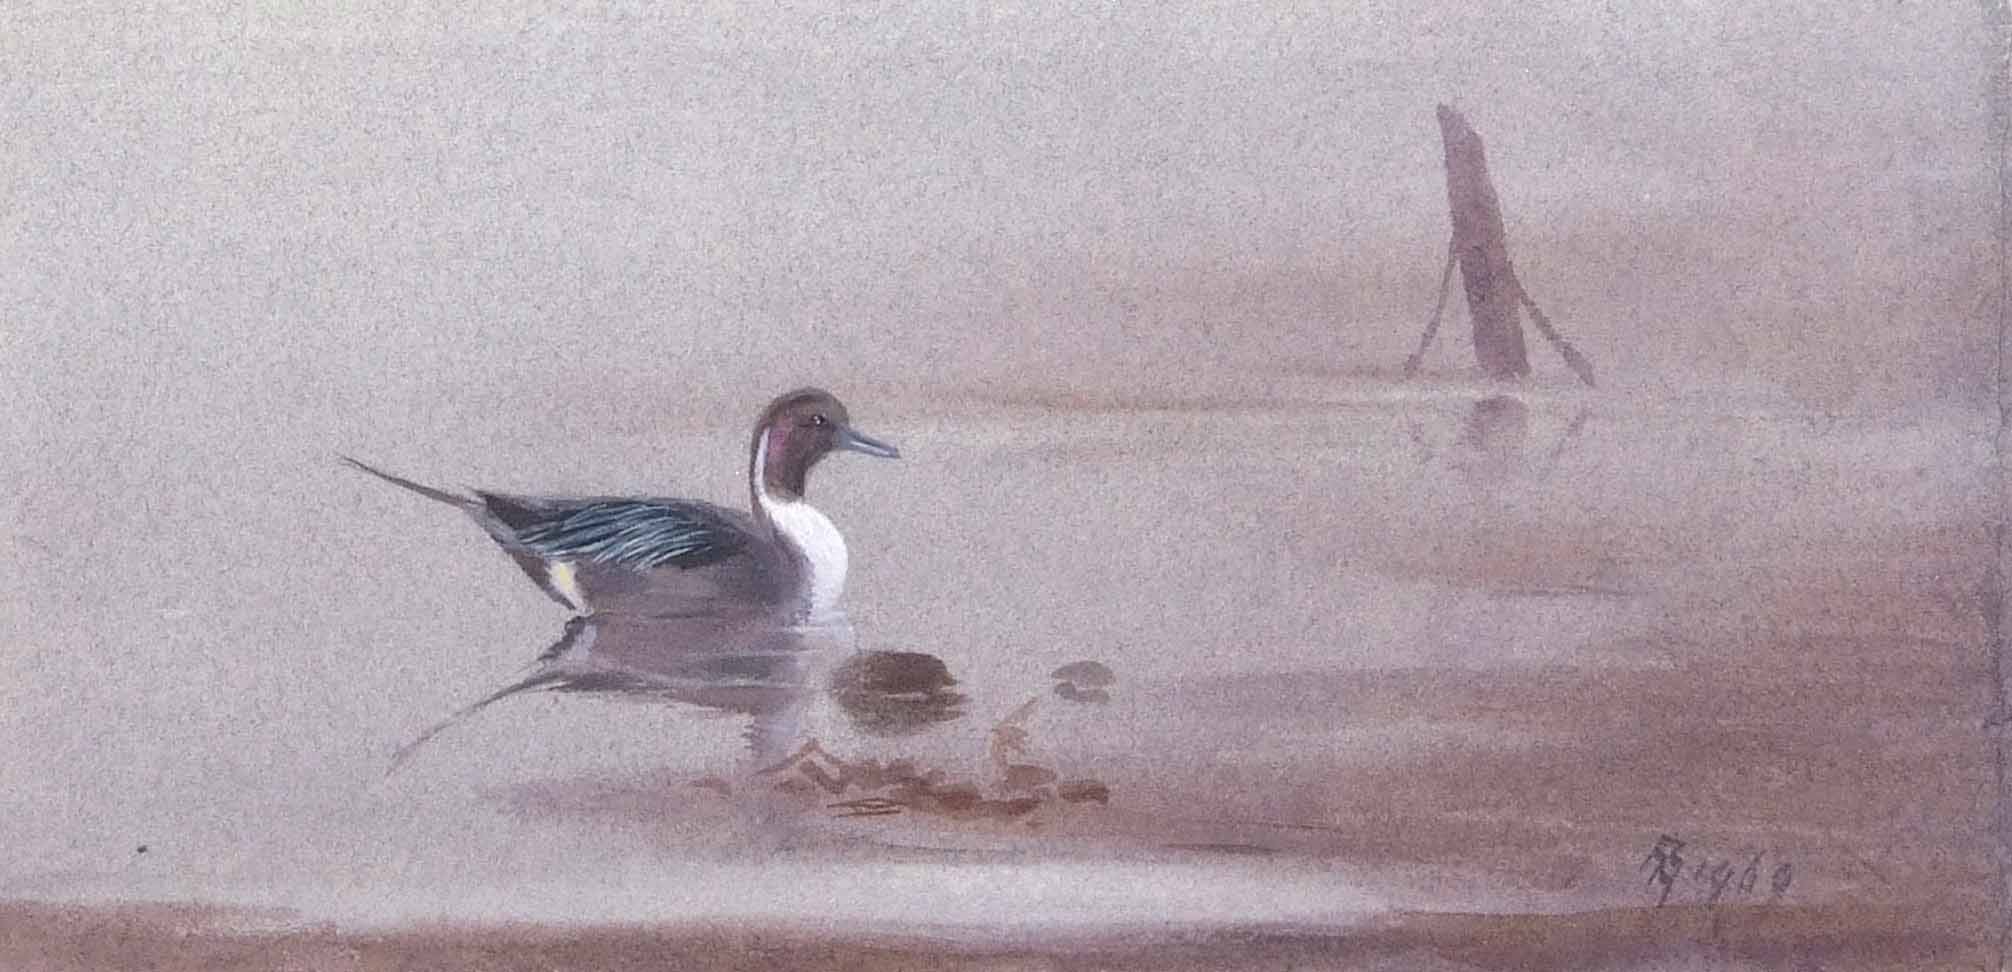 AR Philip Rickman (1891-1982), "Misty Morning, Pintail", watercolour, monogrammed and dated 1969 - Image 2 of 2